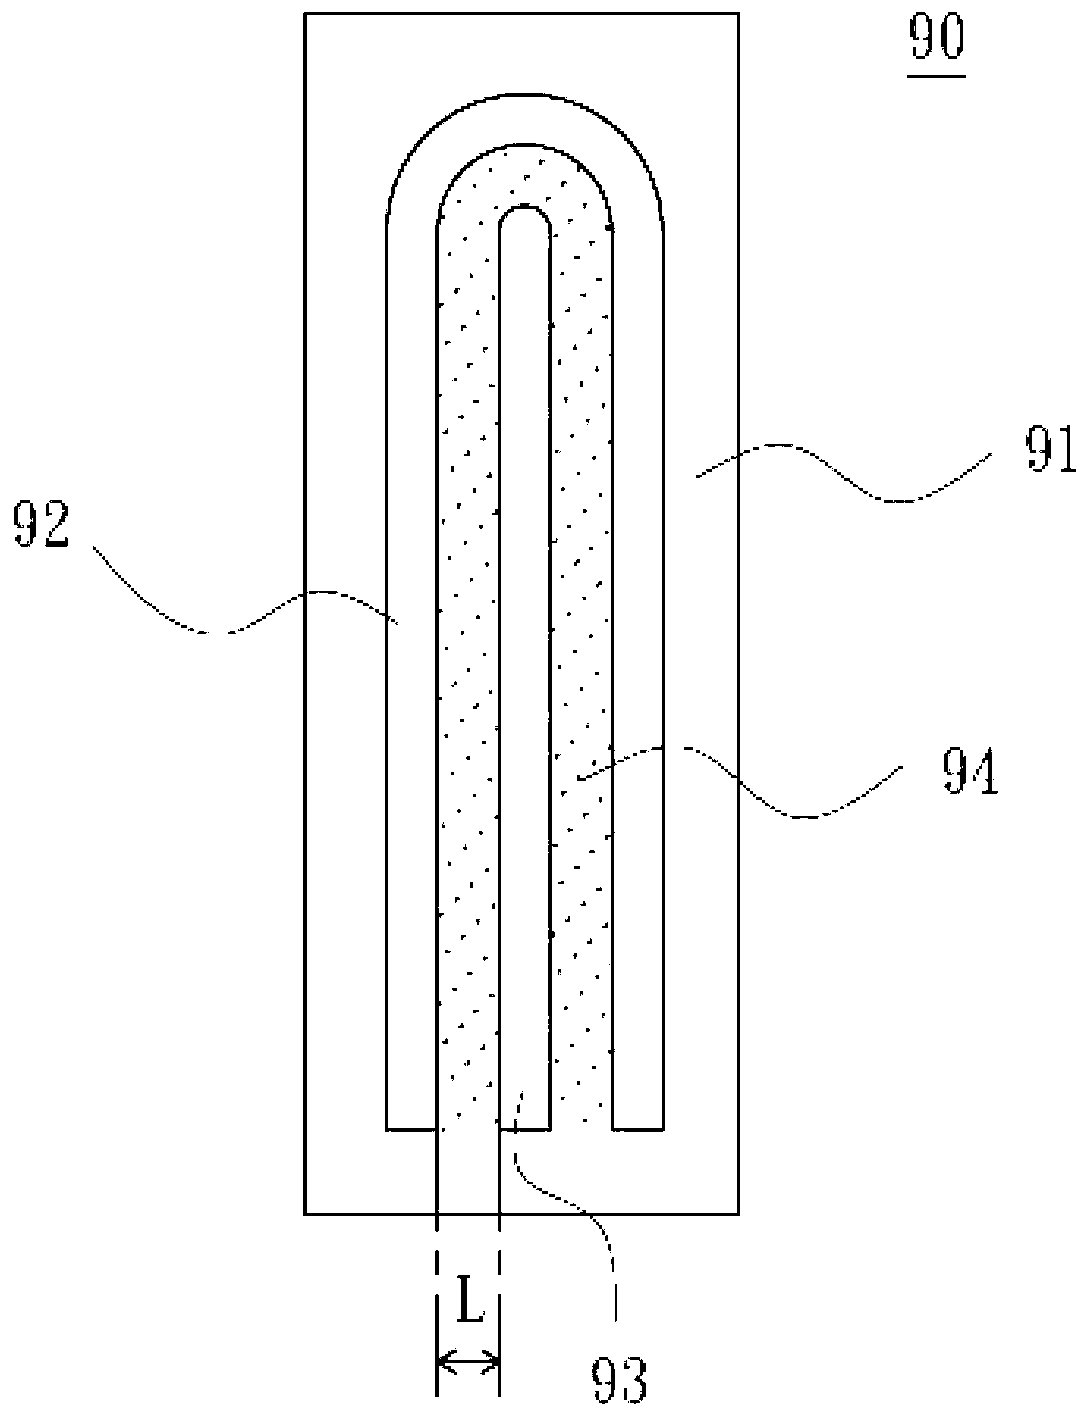 Thin film transistor construction with large channel width and thin film transistor substrate circuit